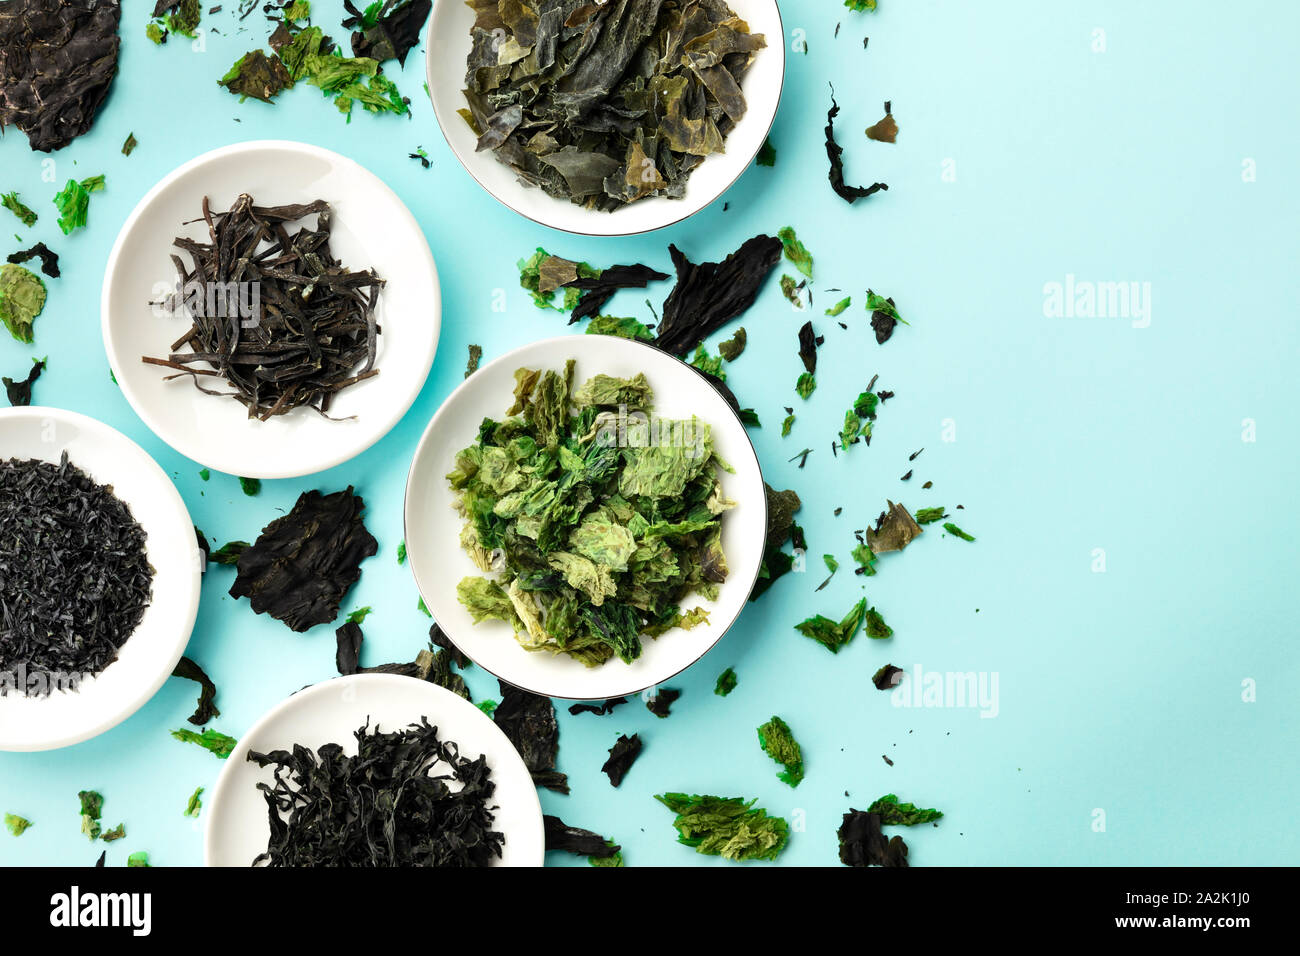 Dry seaweed, sea vegetables, top shot on a light blue background with a place for text Stock Photo